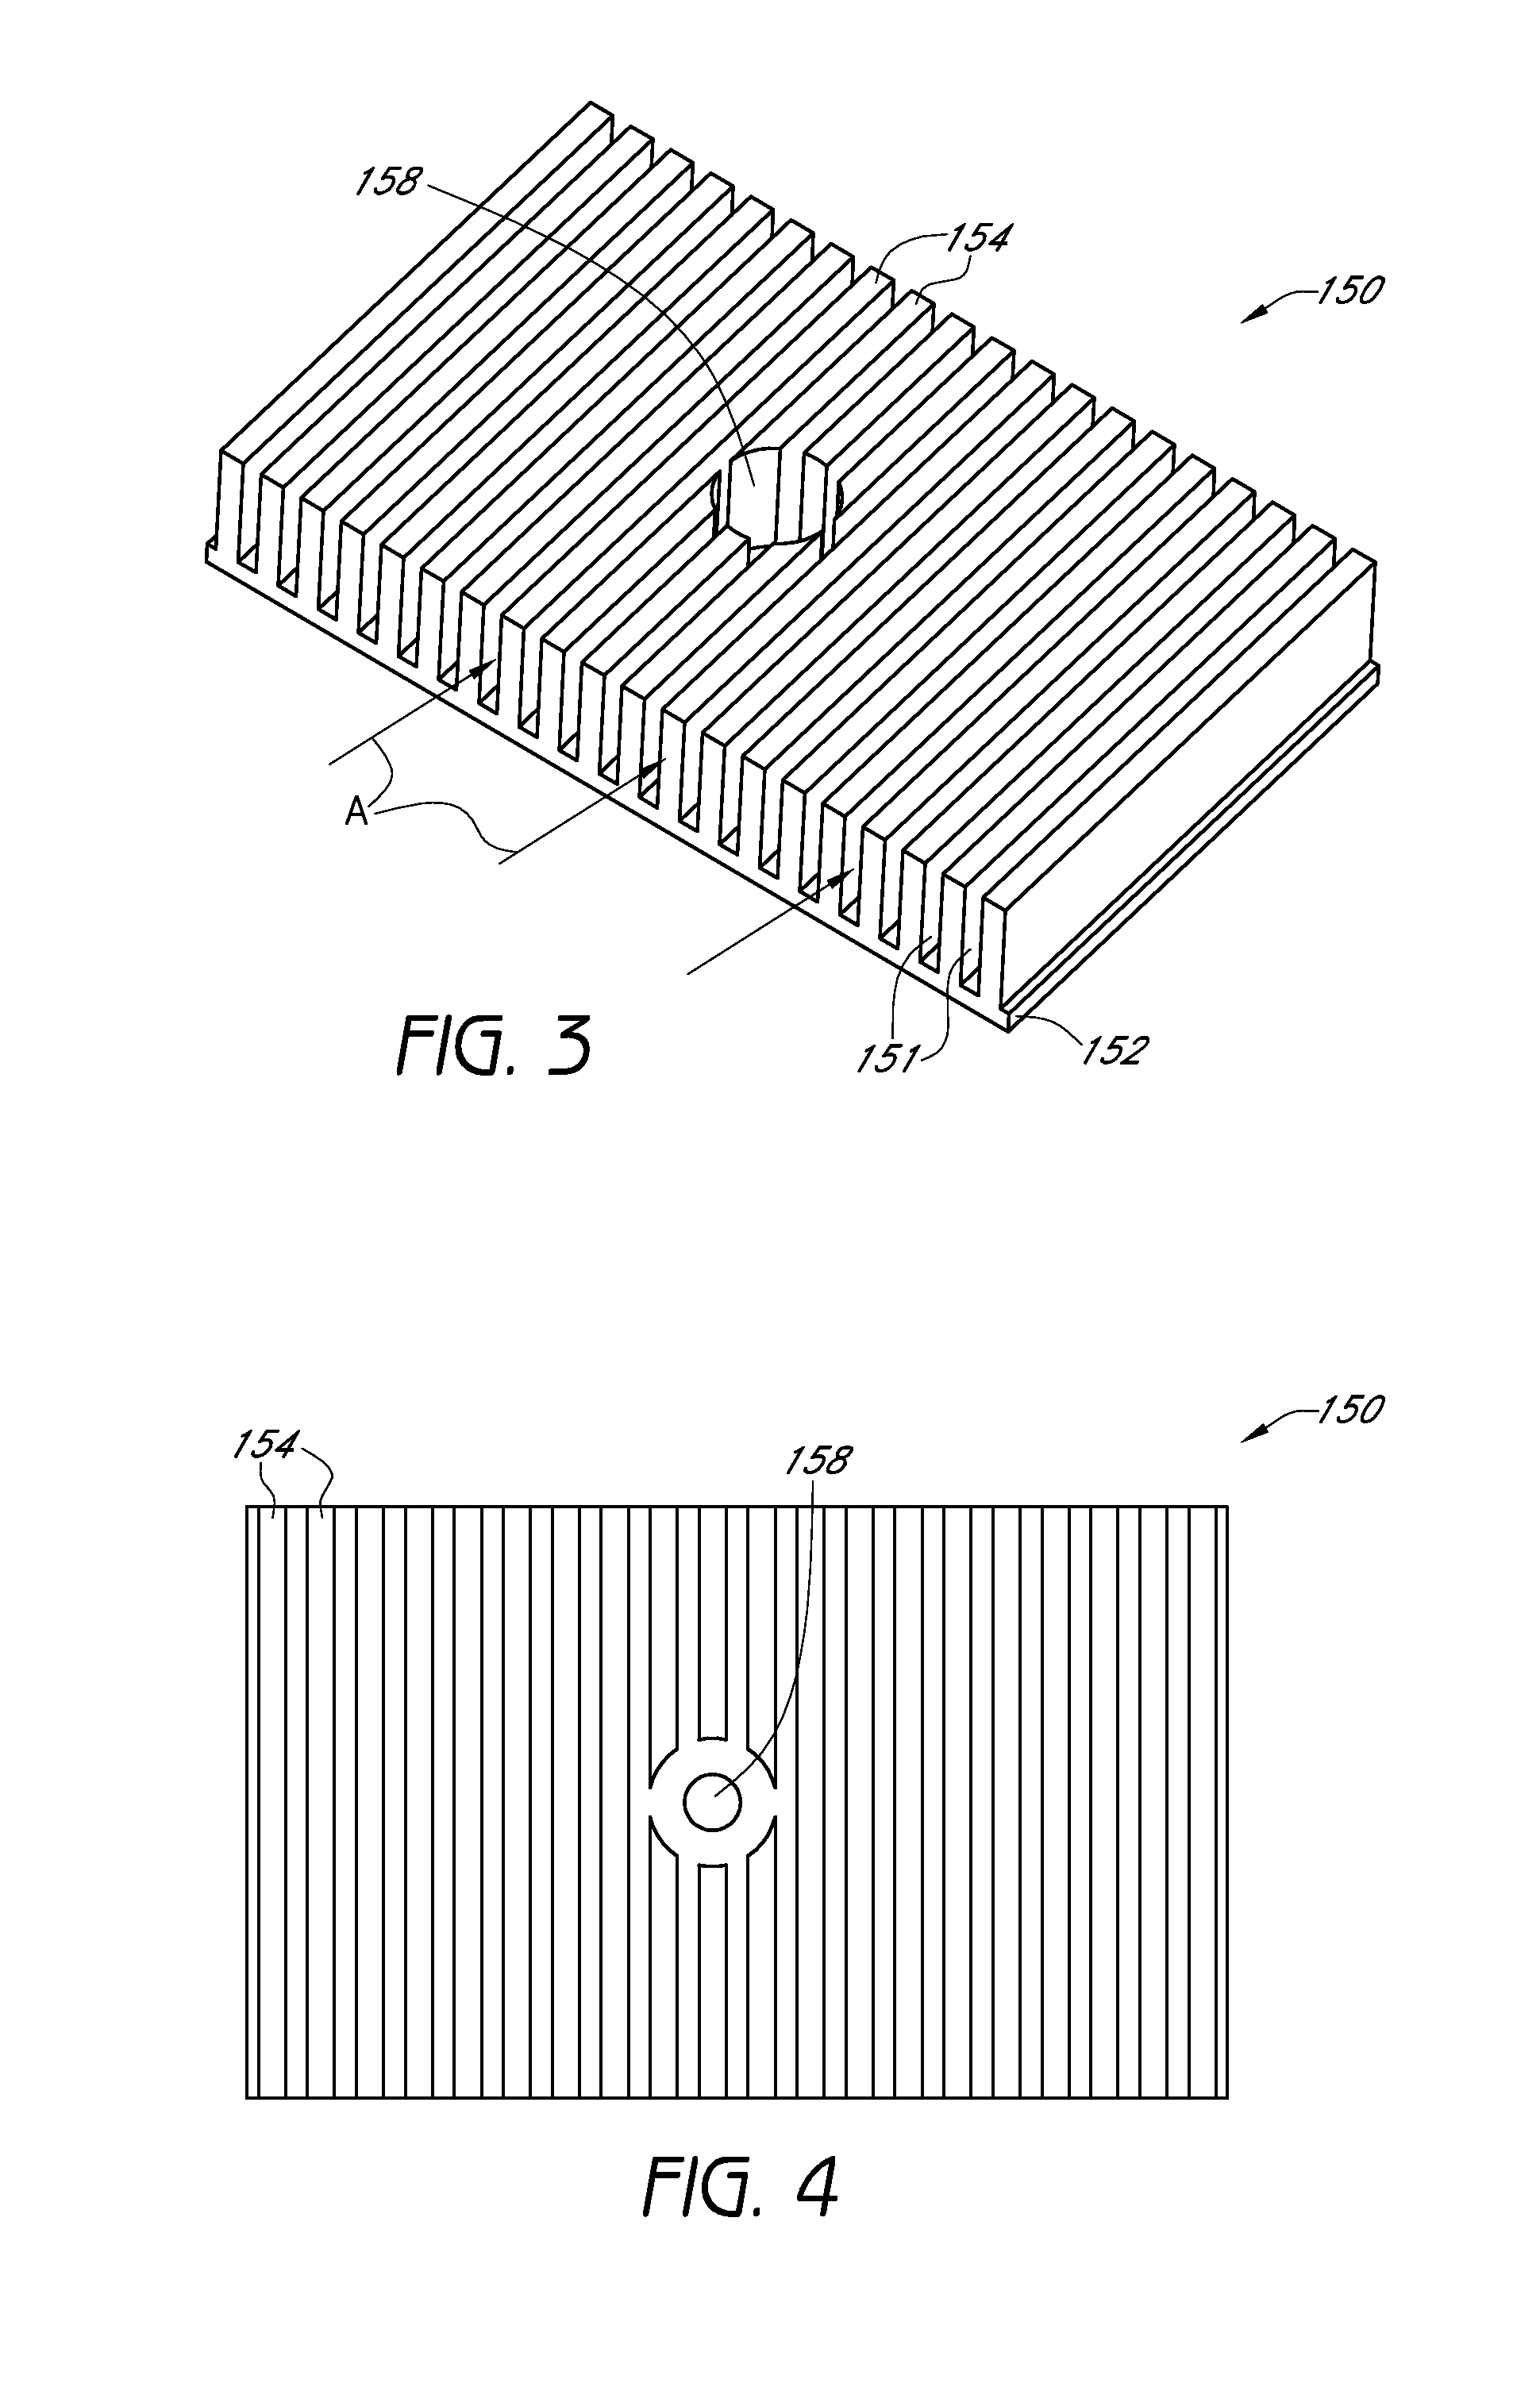 Convective heating device